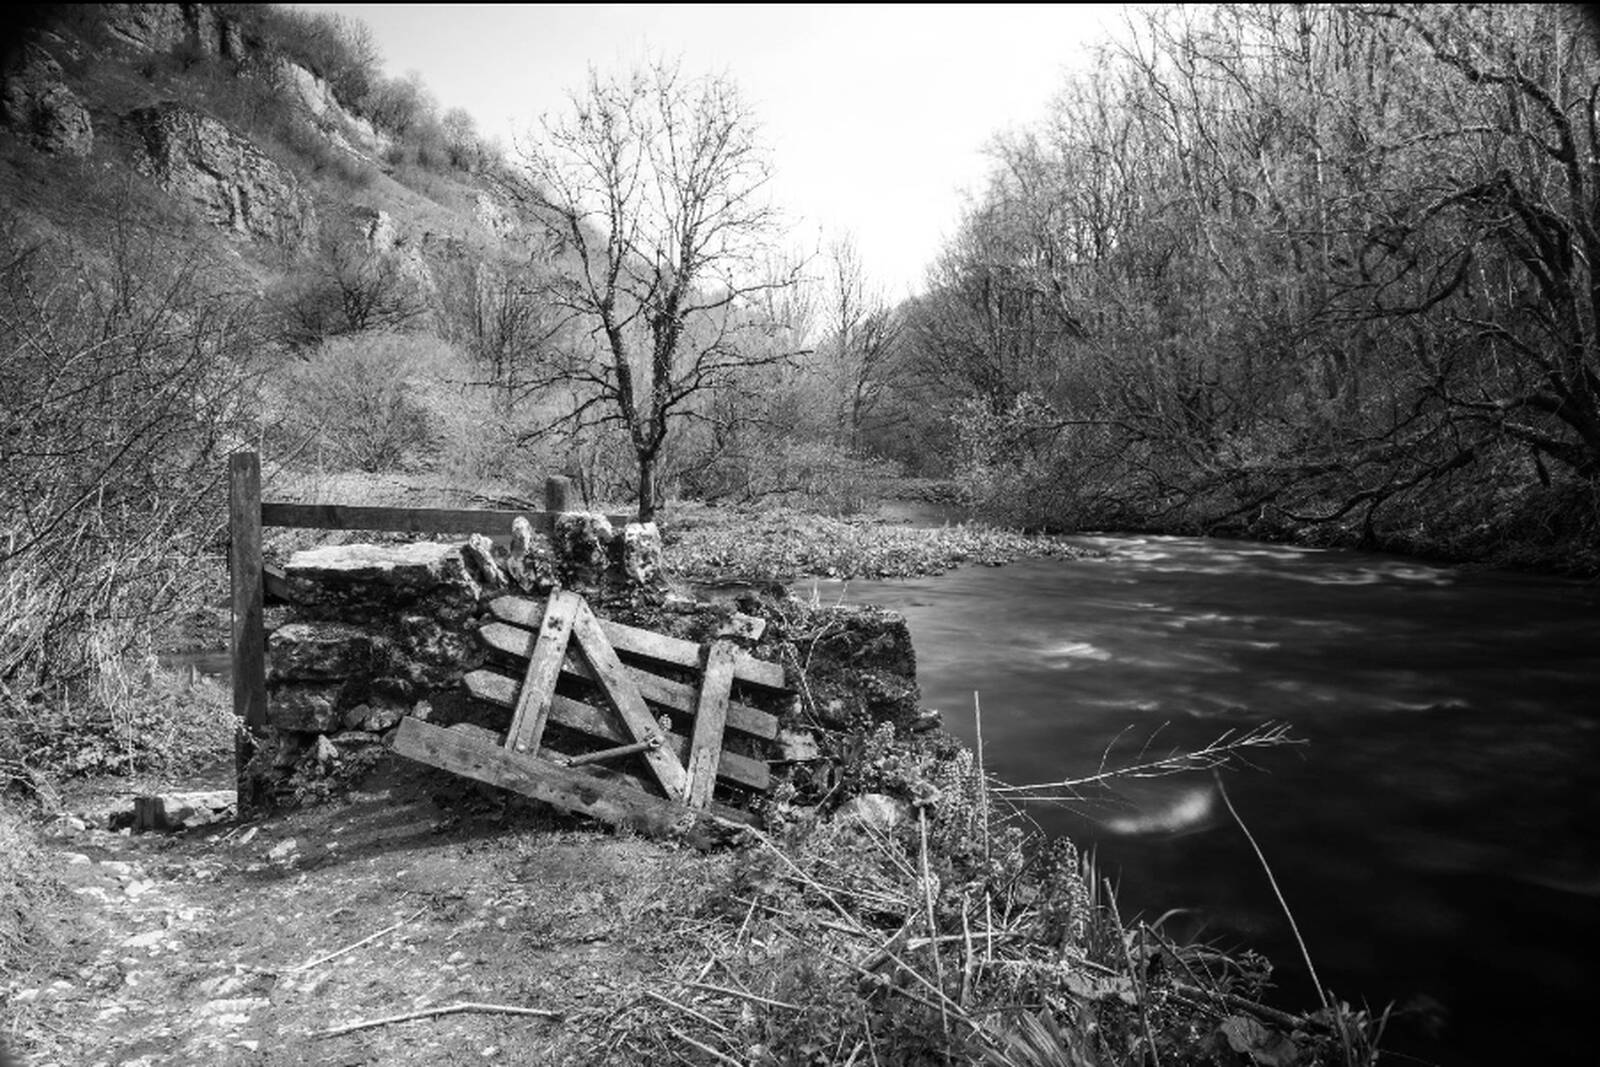 Image of Chee Dale by Nic Dunn